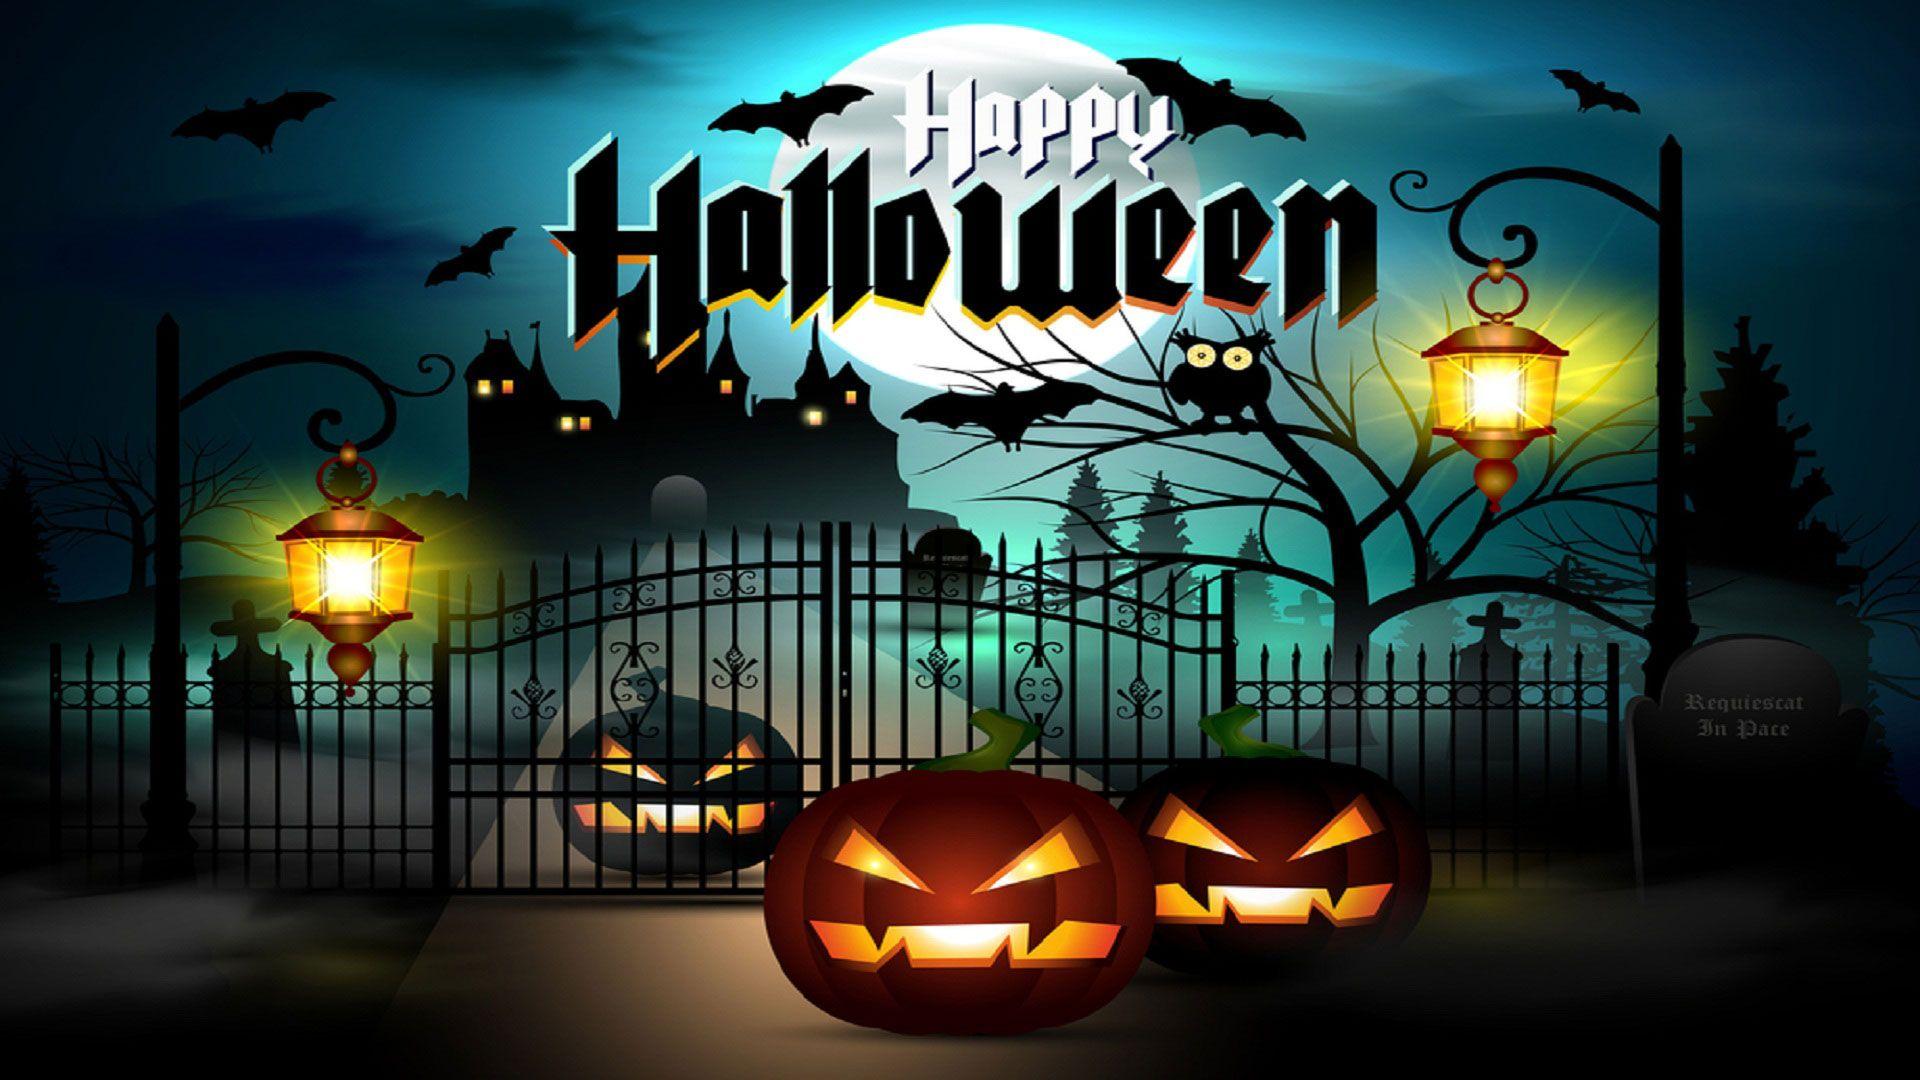 Halloween HD Image Picture & Wallpaper Of 2018 Best Collection